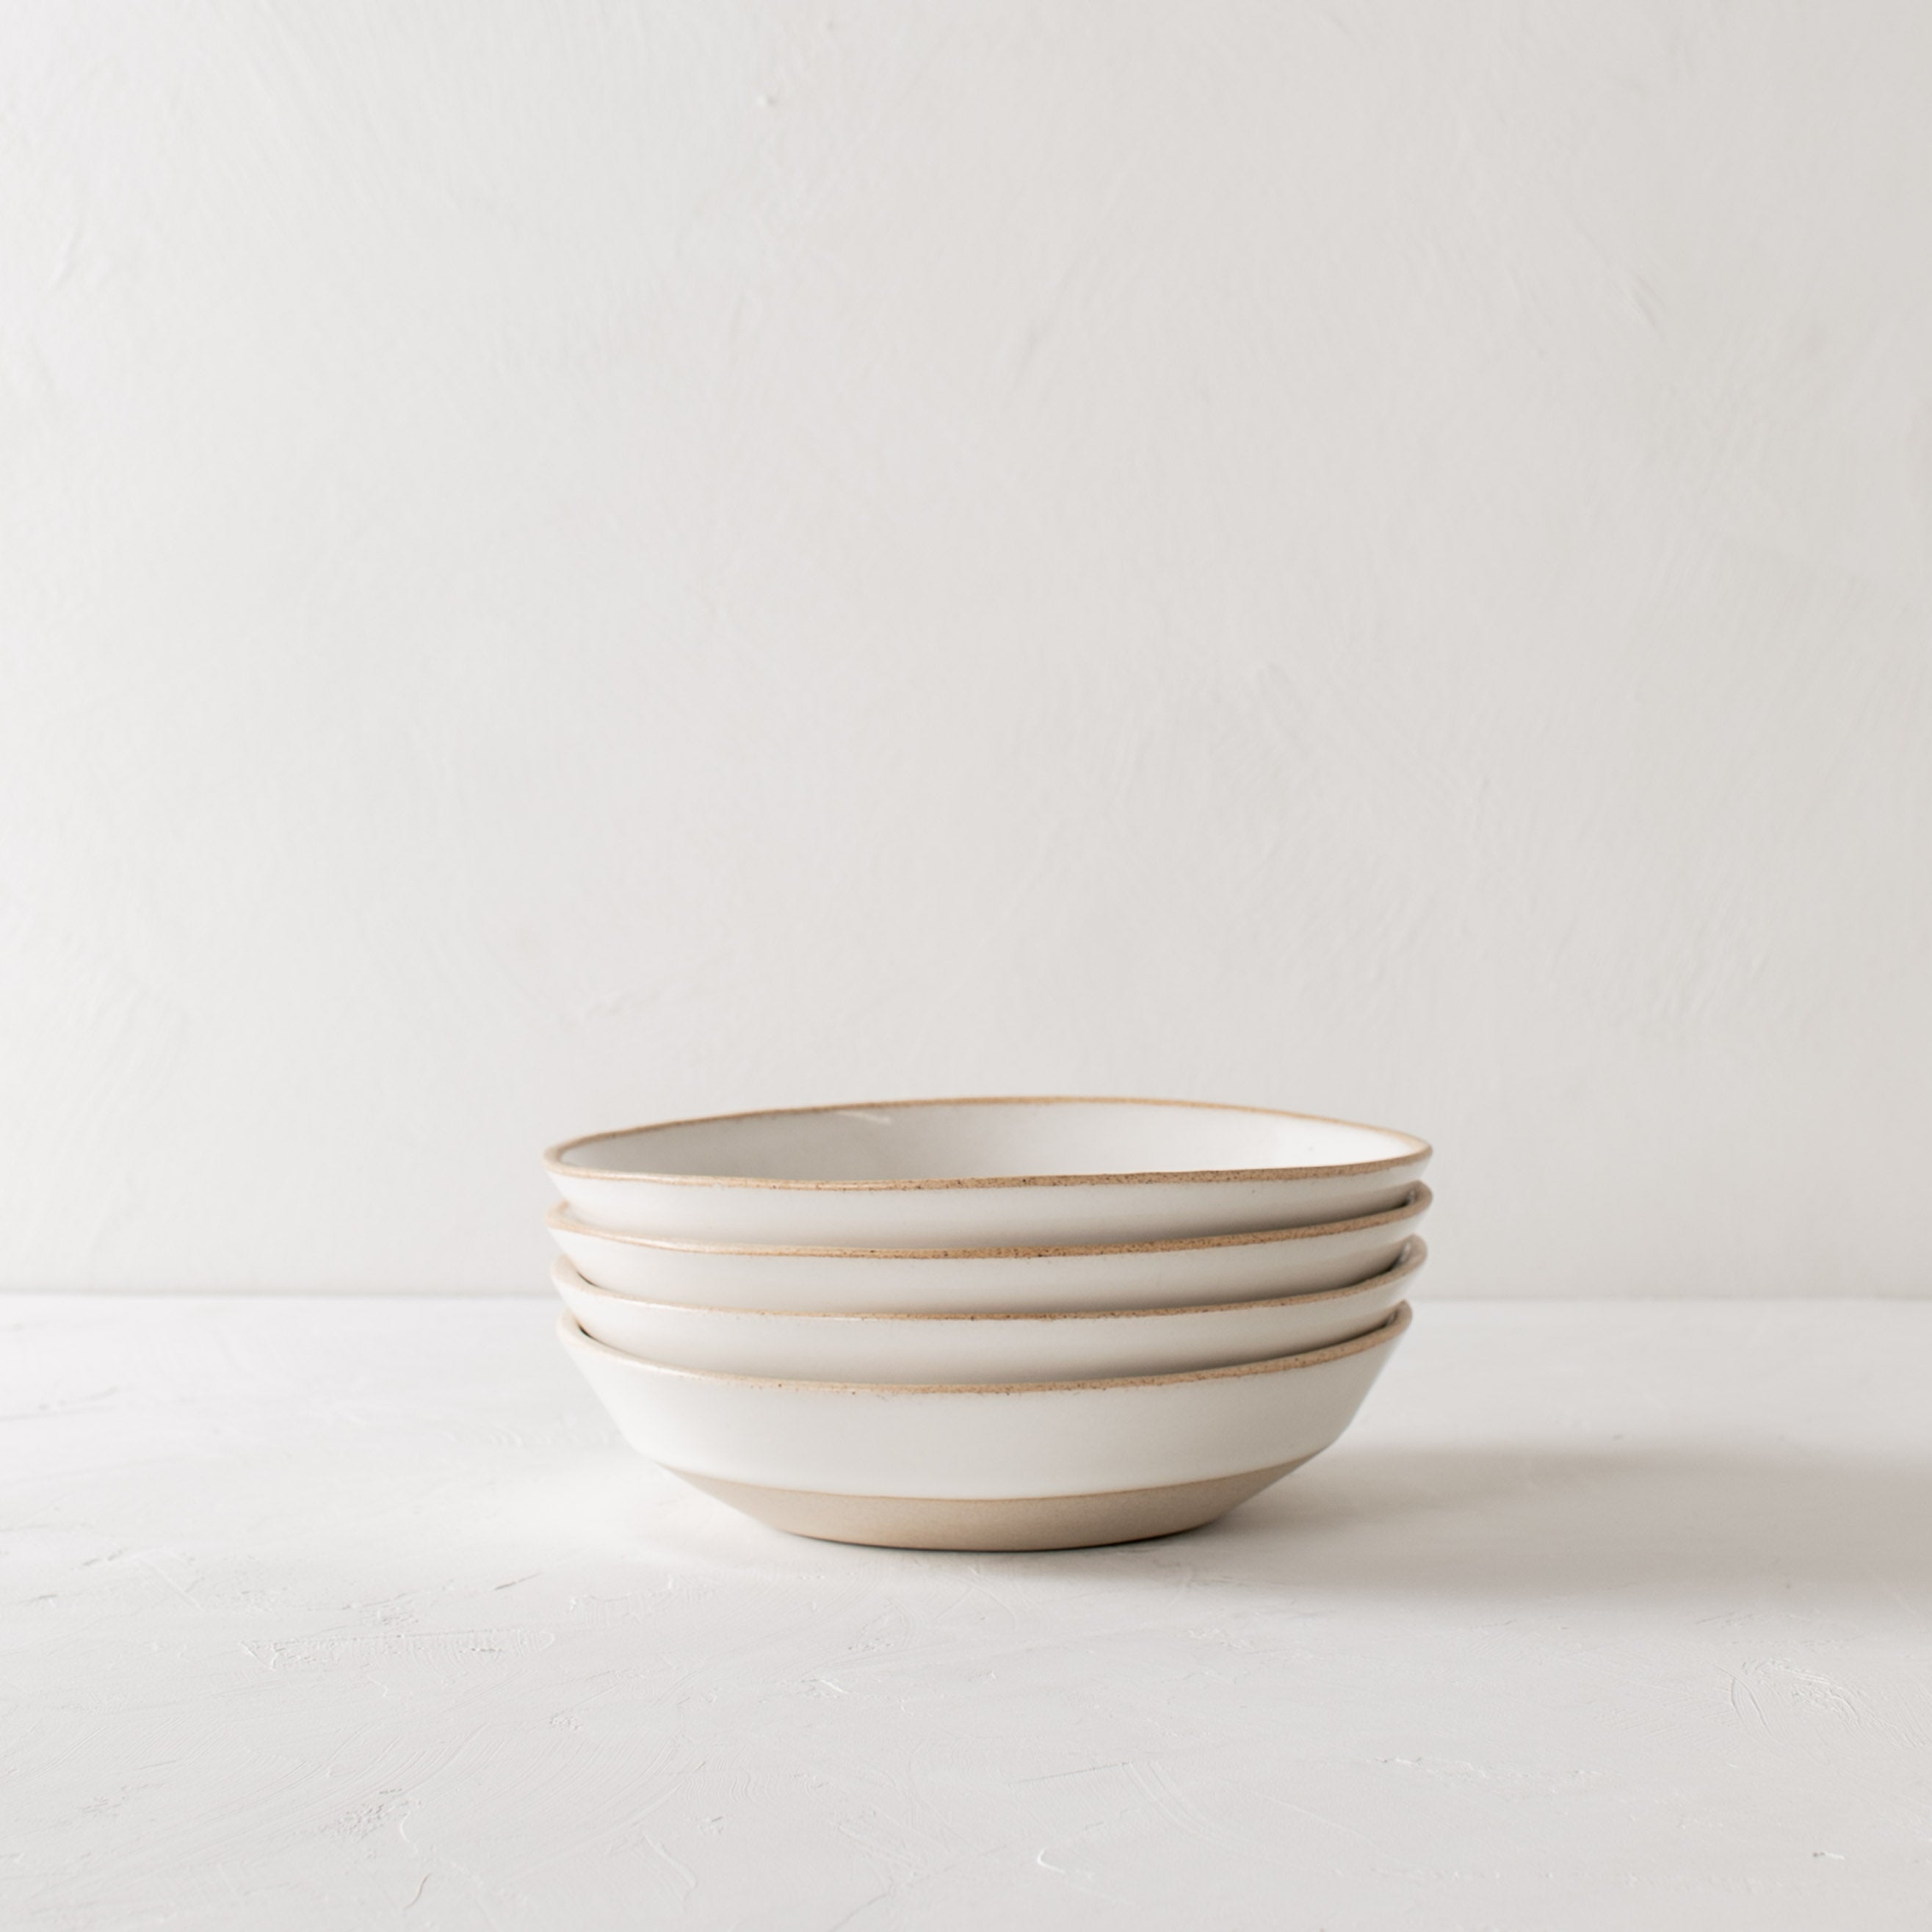 Stack of four minimal white ceramic minimal pasta bowls. Bowls have an exposed stoneware rime and base. Handmade pasta bowl designed and sold by Convivial Production, Kansas City ceramics.